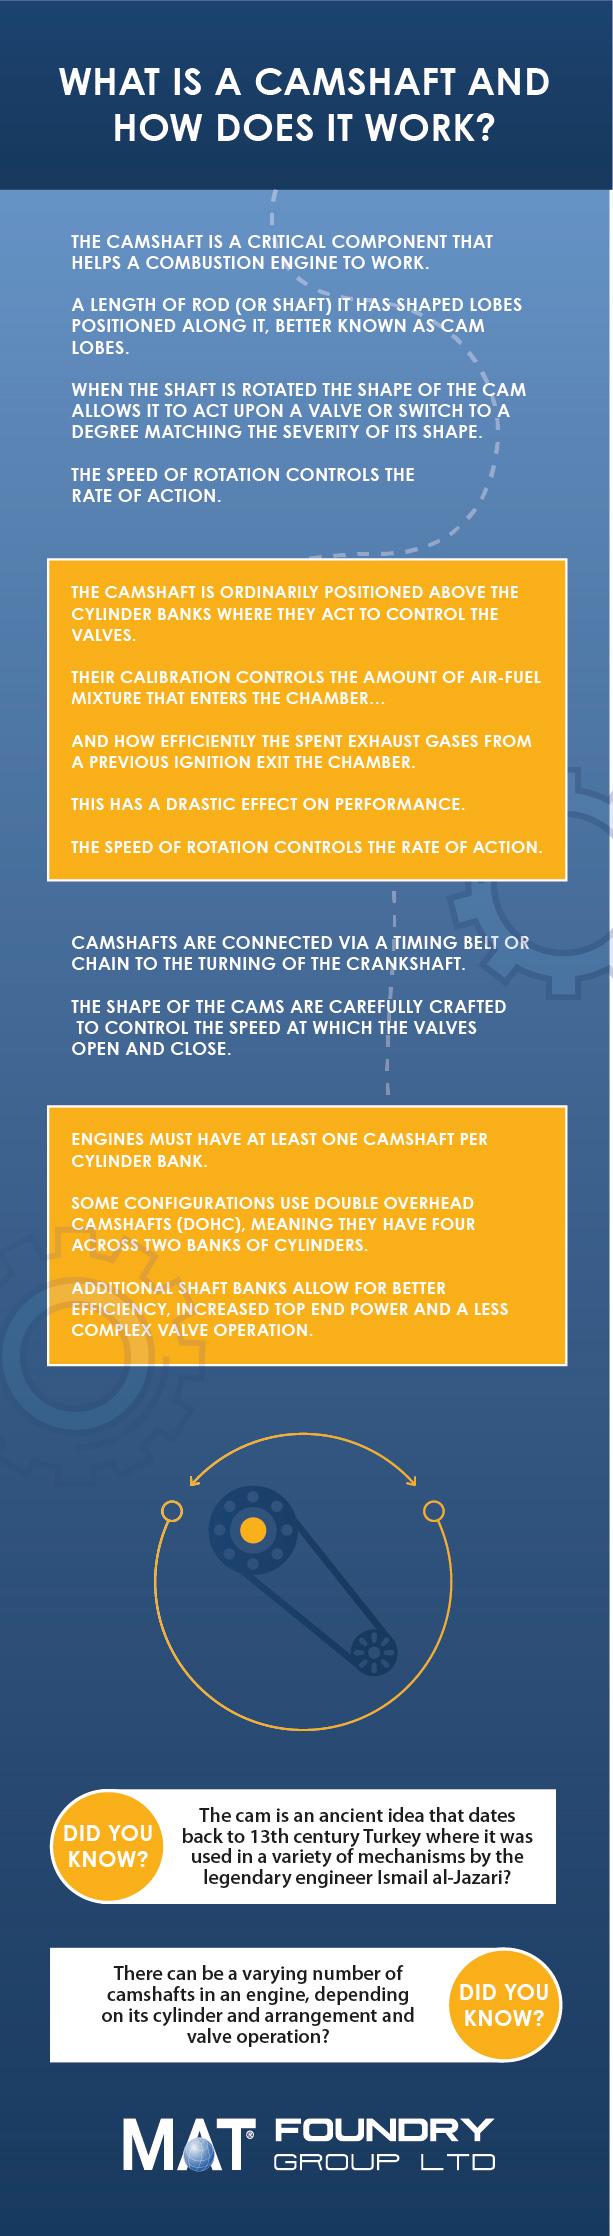 Camshaft Infographic - MAT Foundry